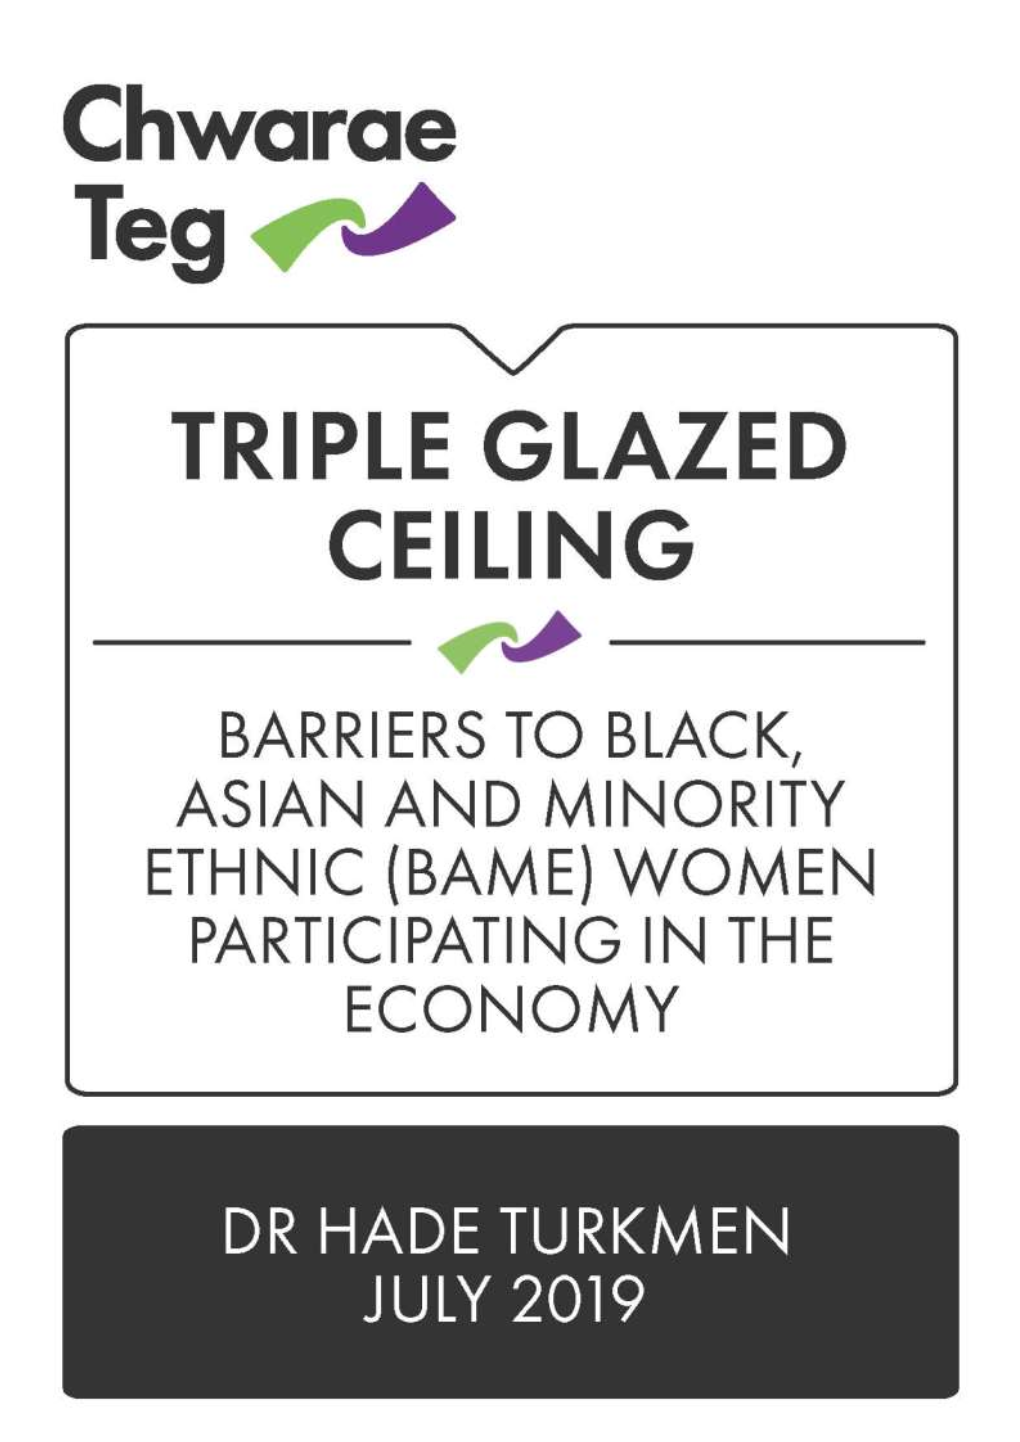 TGC-Barriers-To-BAME-Women Full